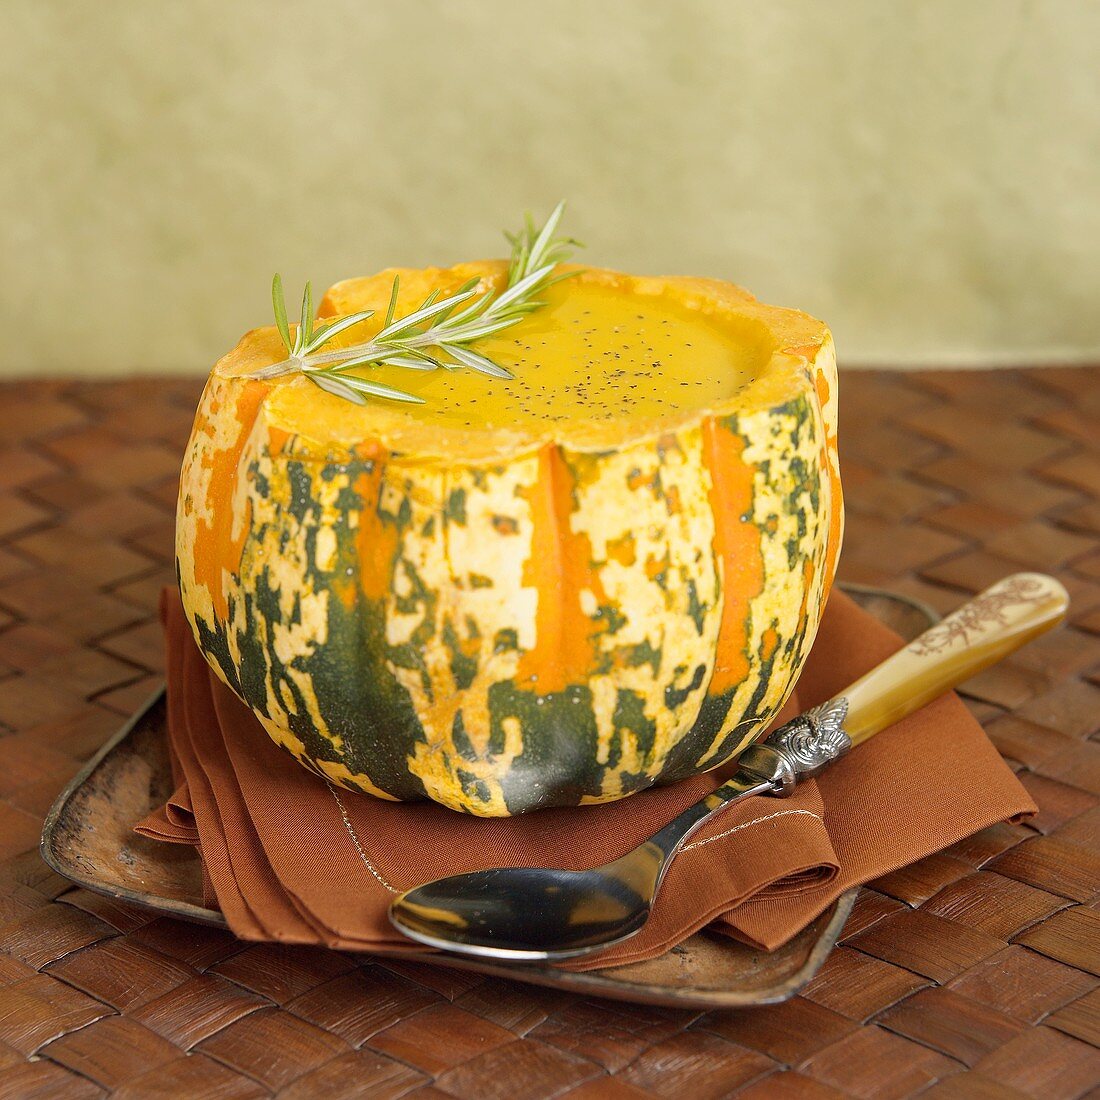 Squash Soup inside a Squash Shell with Fresh Rosemary